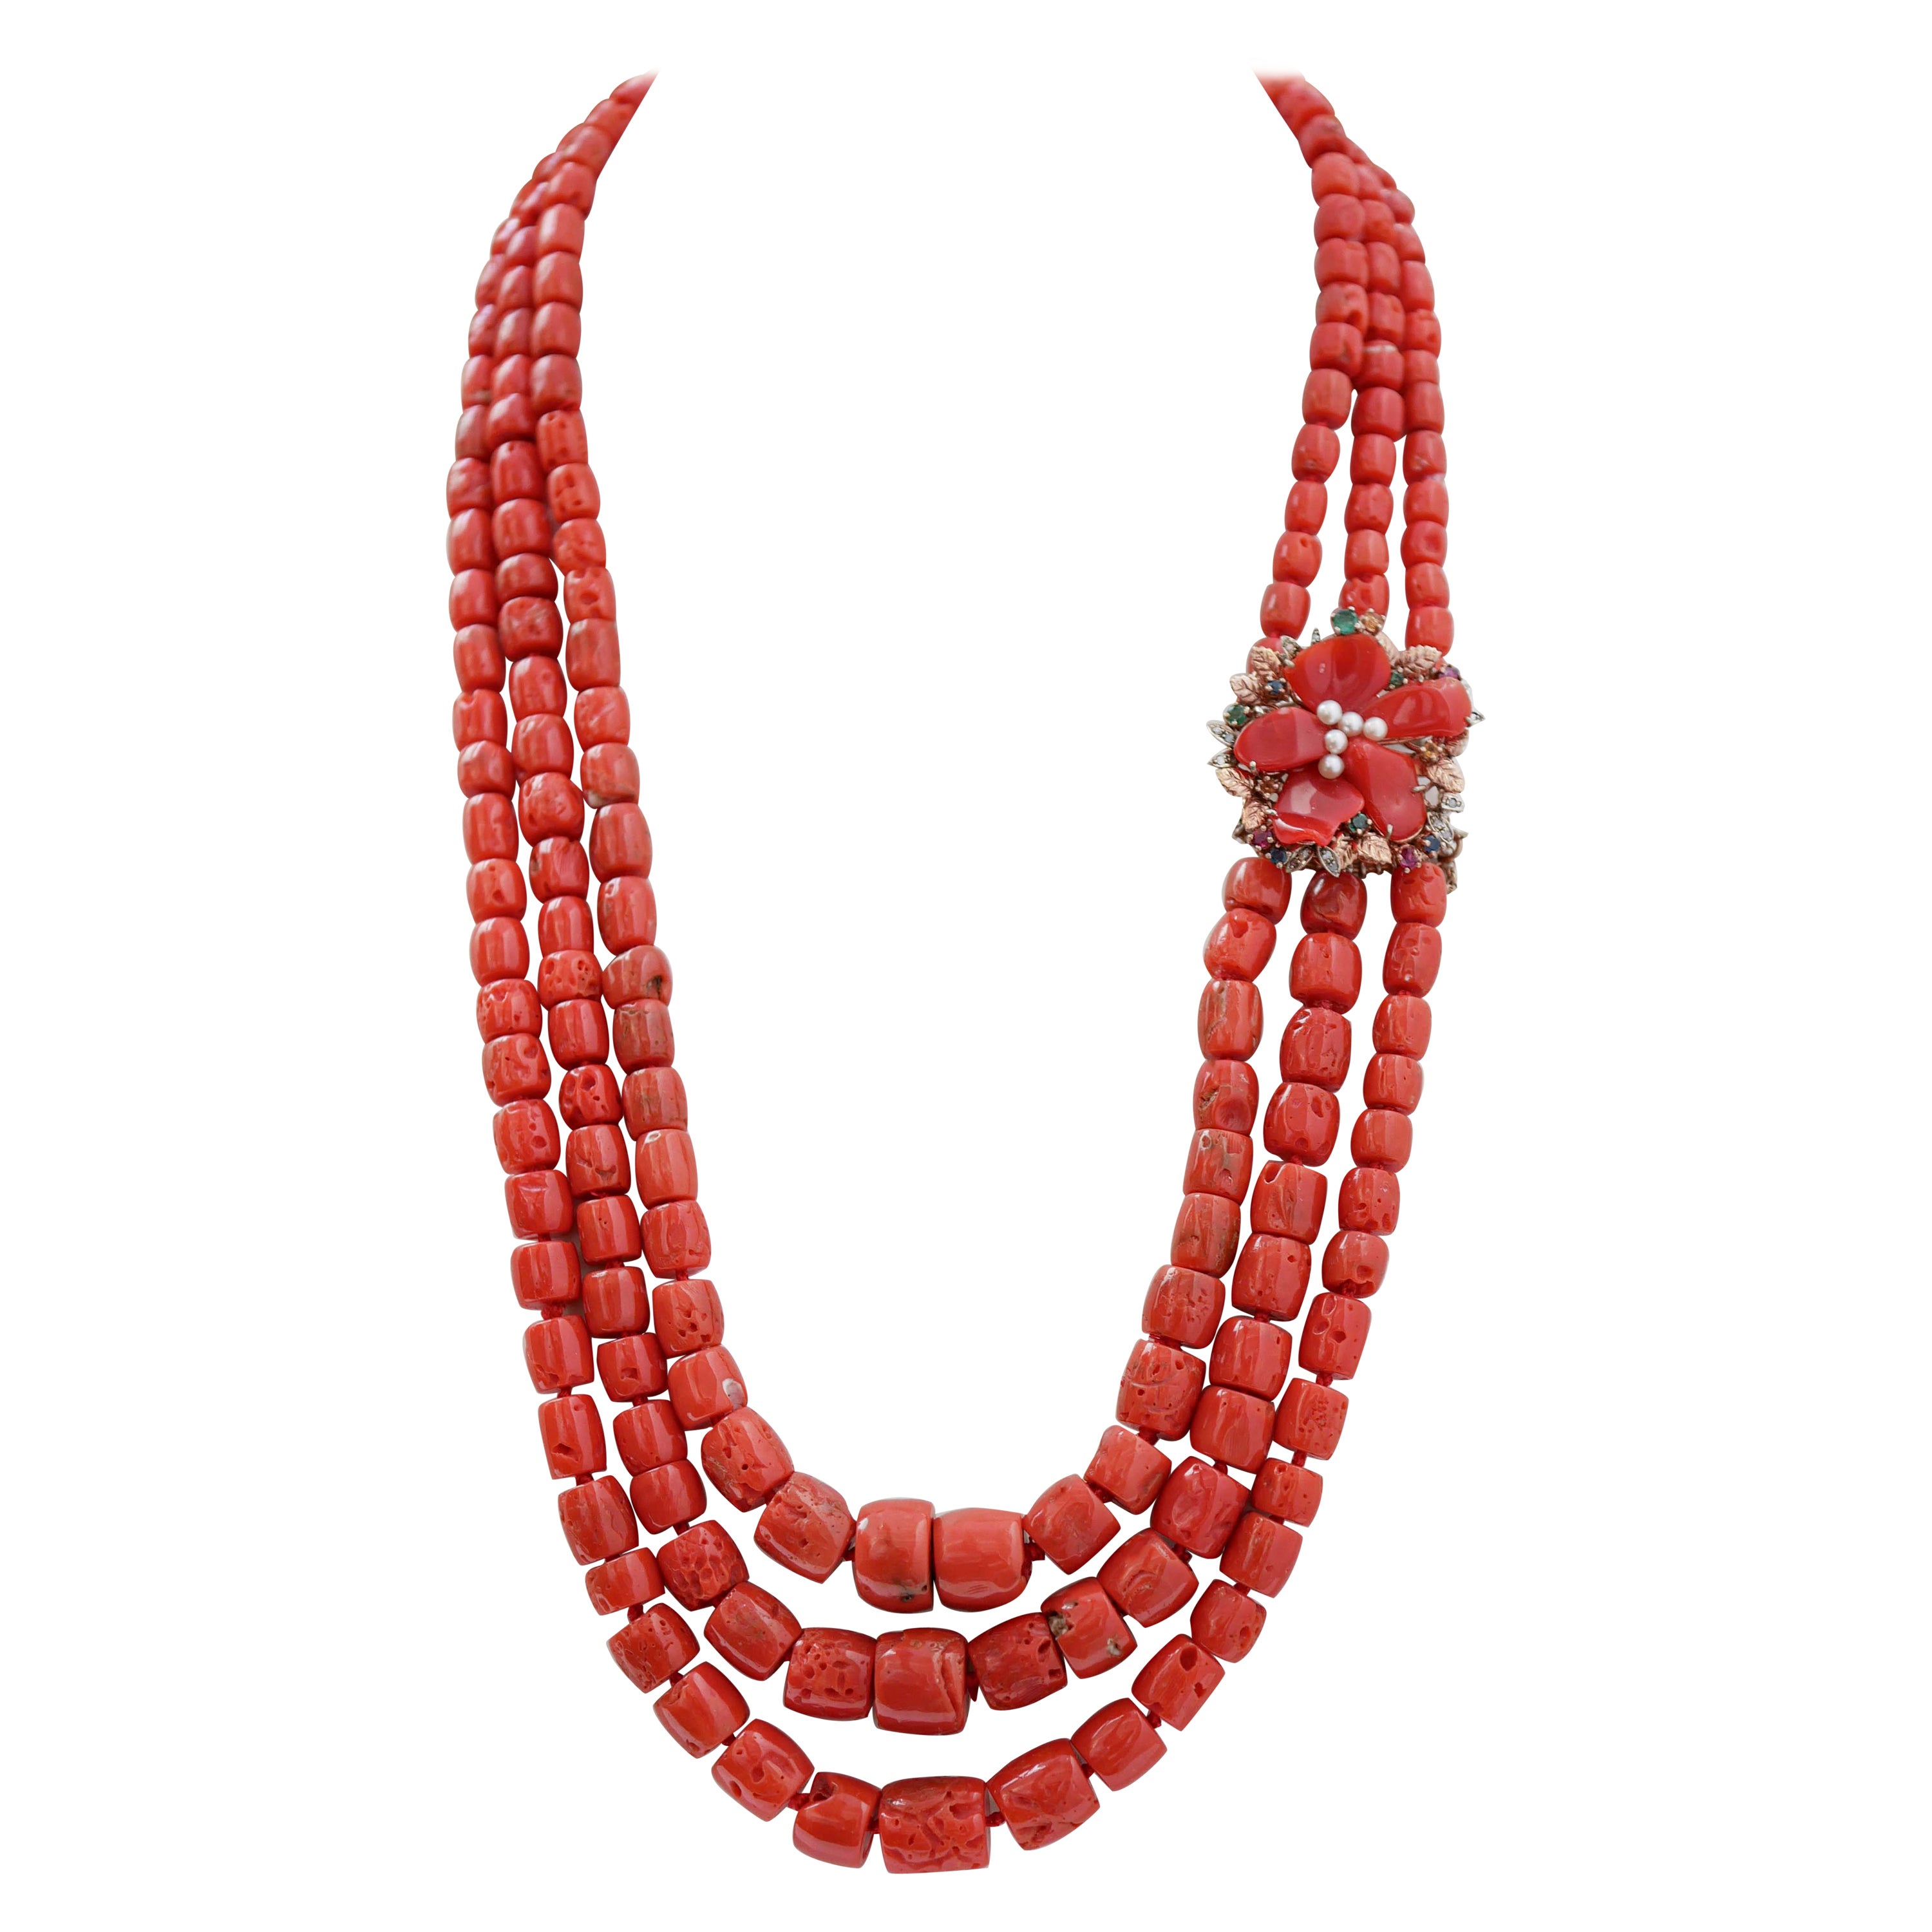 Coral, Pearls, Rubies, Emeralds, Sapphires, Diamonds, Gold and Silver Necklace. For Sale